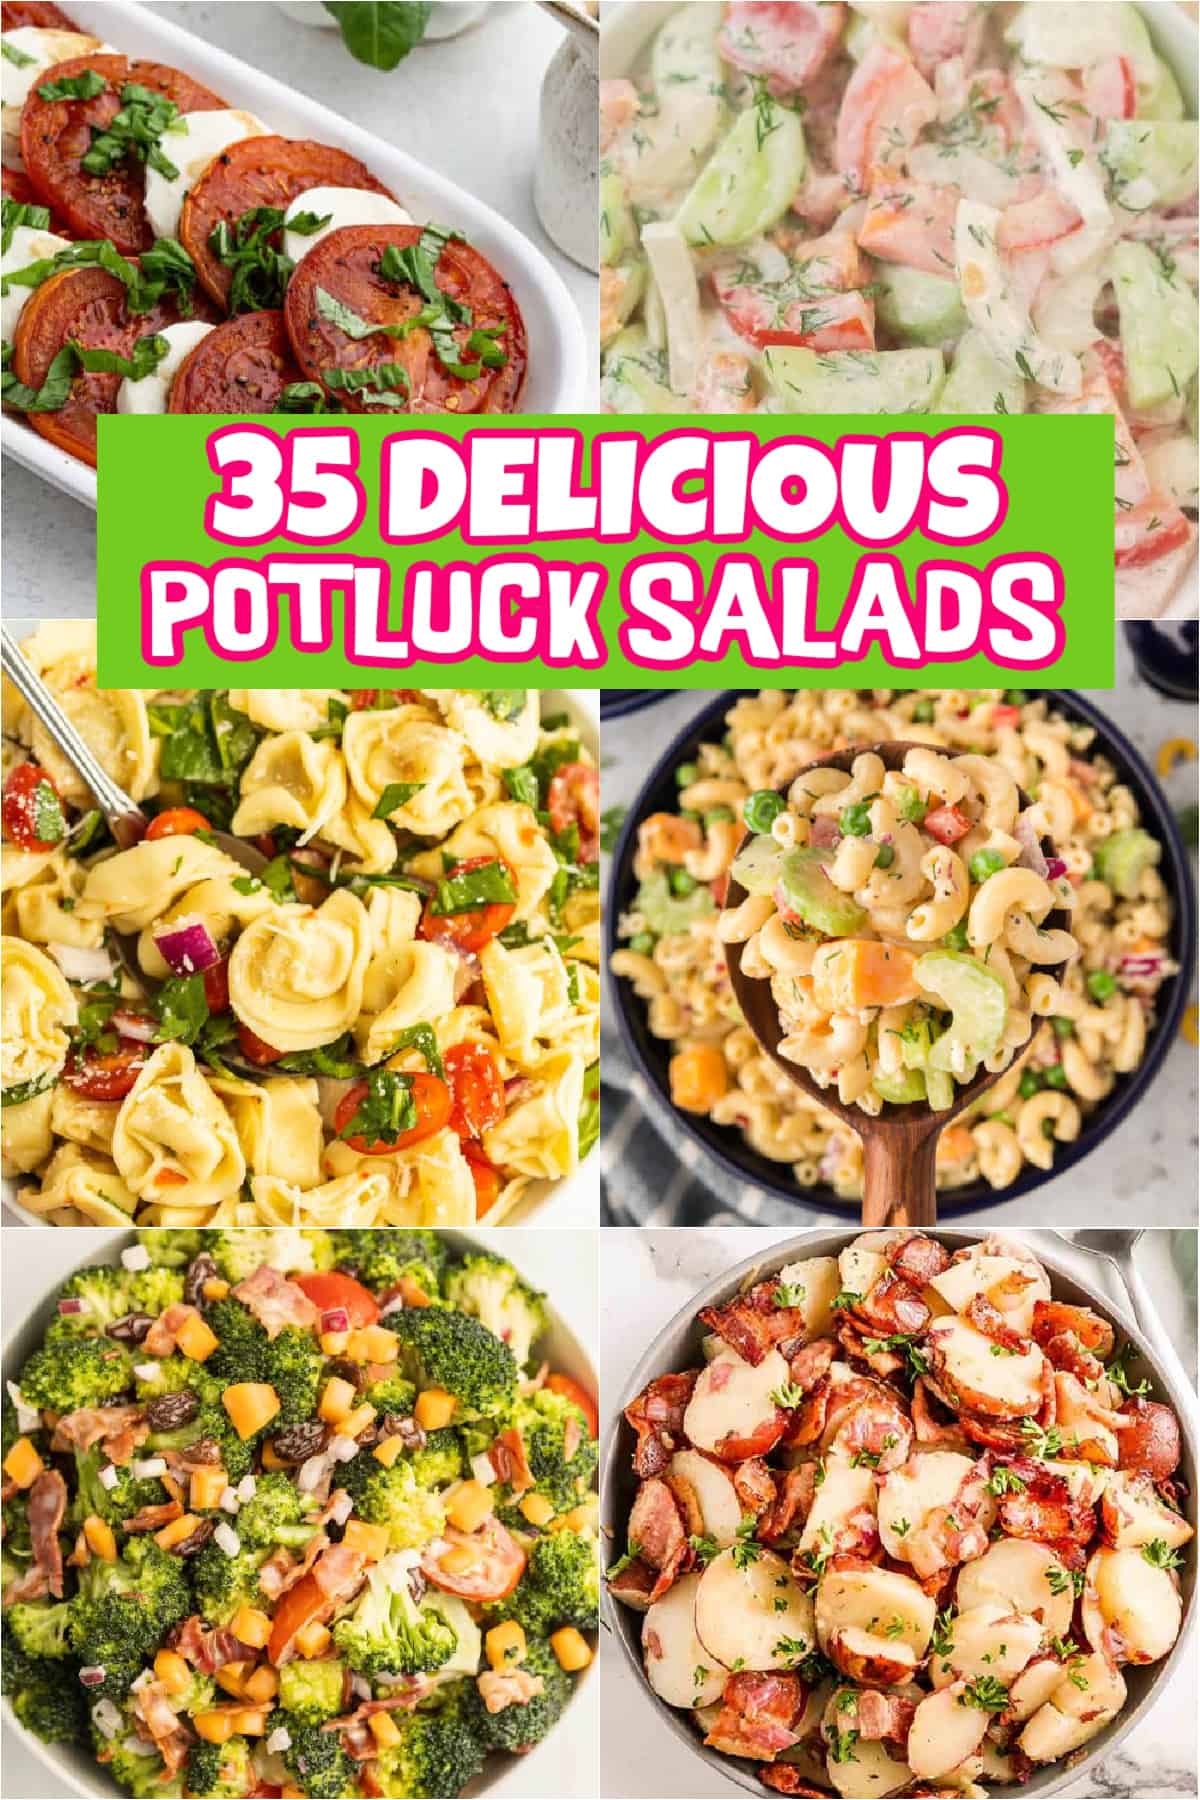 From pasta salads, to fruit salad, and green salads we have the best Potluck Salads to feed a crowd. Perfect for any holiday or gathering. If you are hosting a potluck and going to one this summer, these salads are the perfect addition to any meal. Choose from 35 delicious and easy salad recipes that everyone will love. #eatingonadime #potlucksalads #saladrecipes